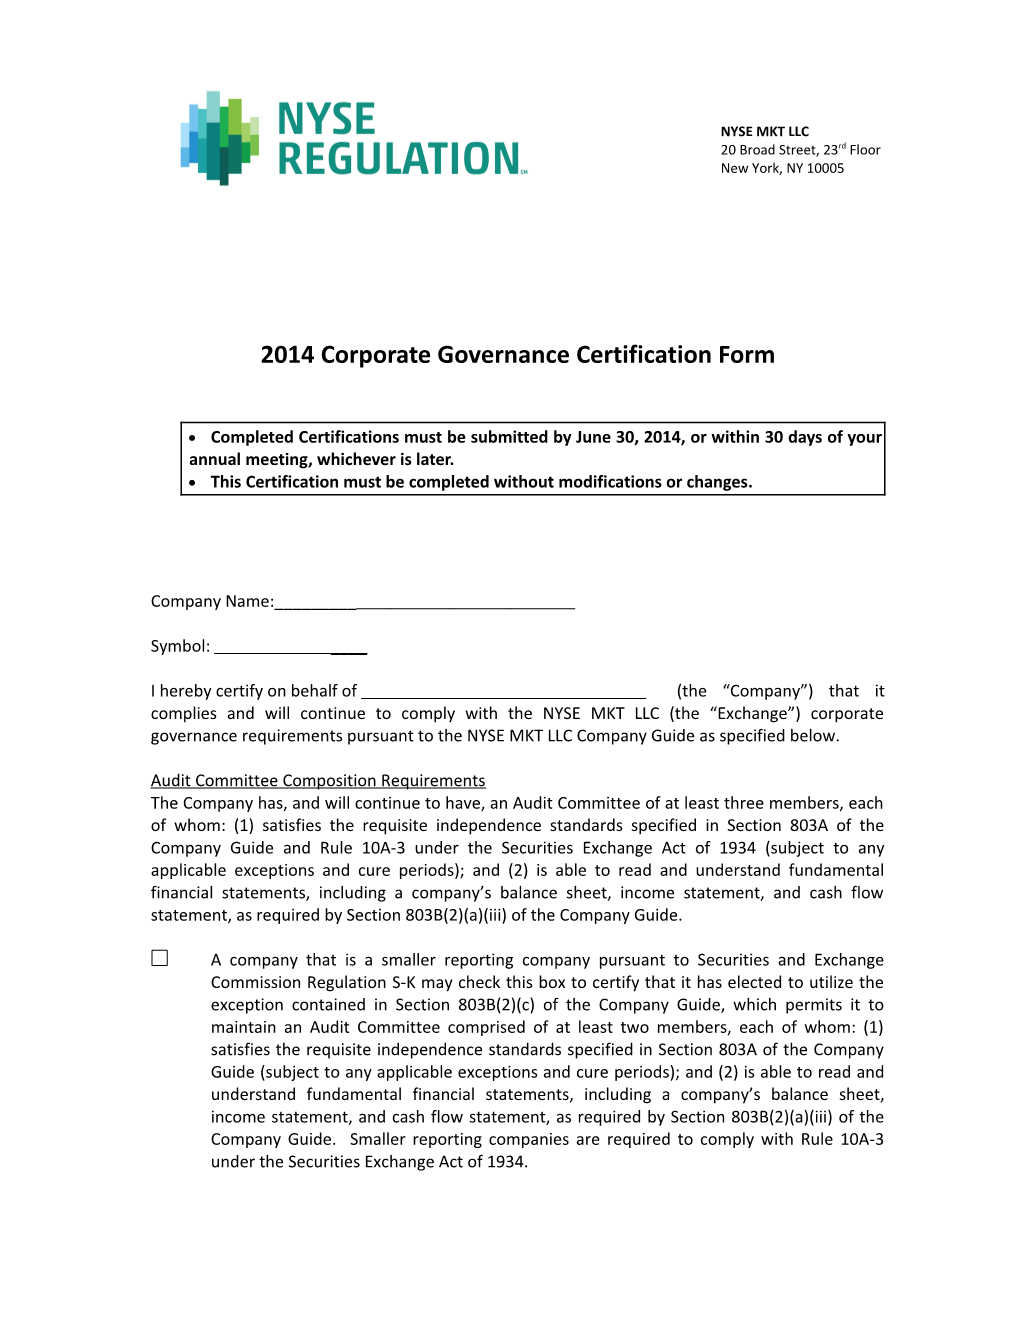 Certification Form Audit Committee Requirements